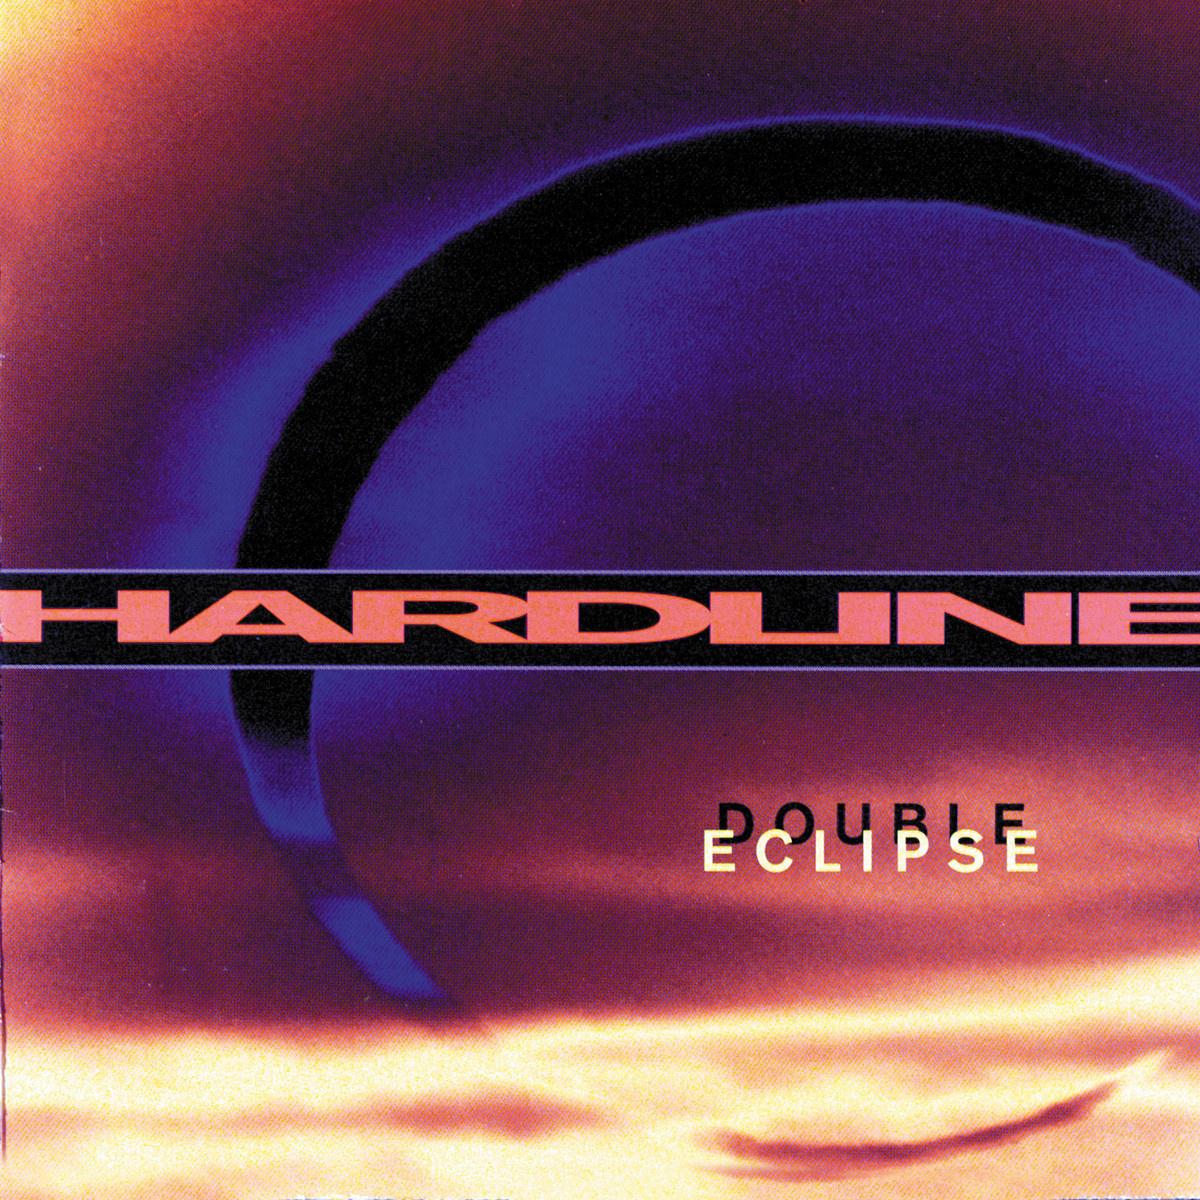 Can't Find My Way歌词 歌手Hardline-专辑Double Eclipse-单曲《Can't Find My Way》LRC歌词下载